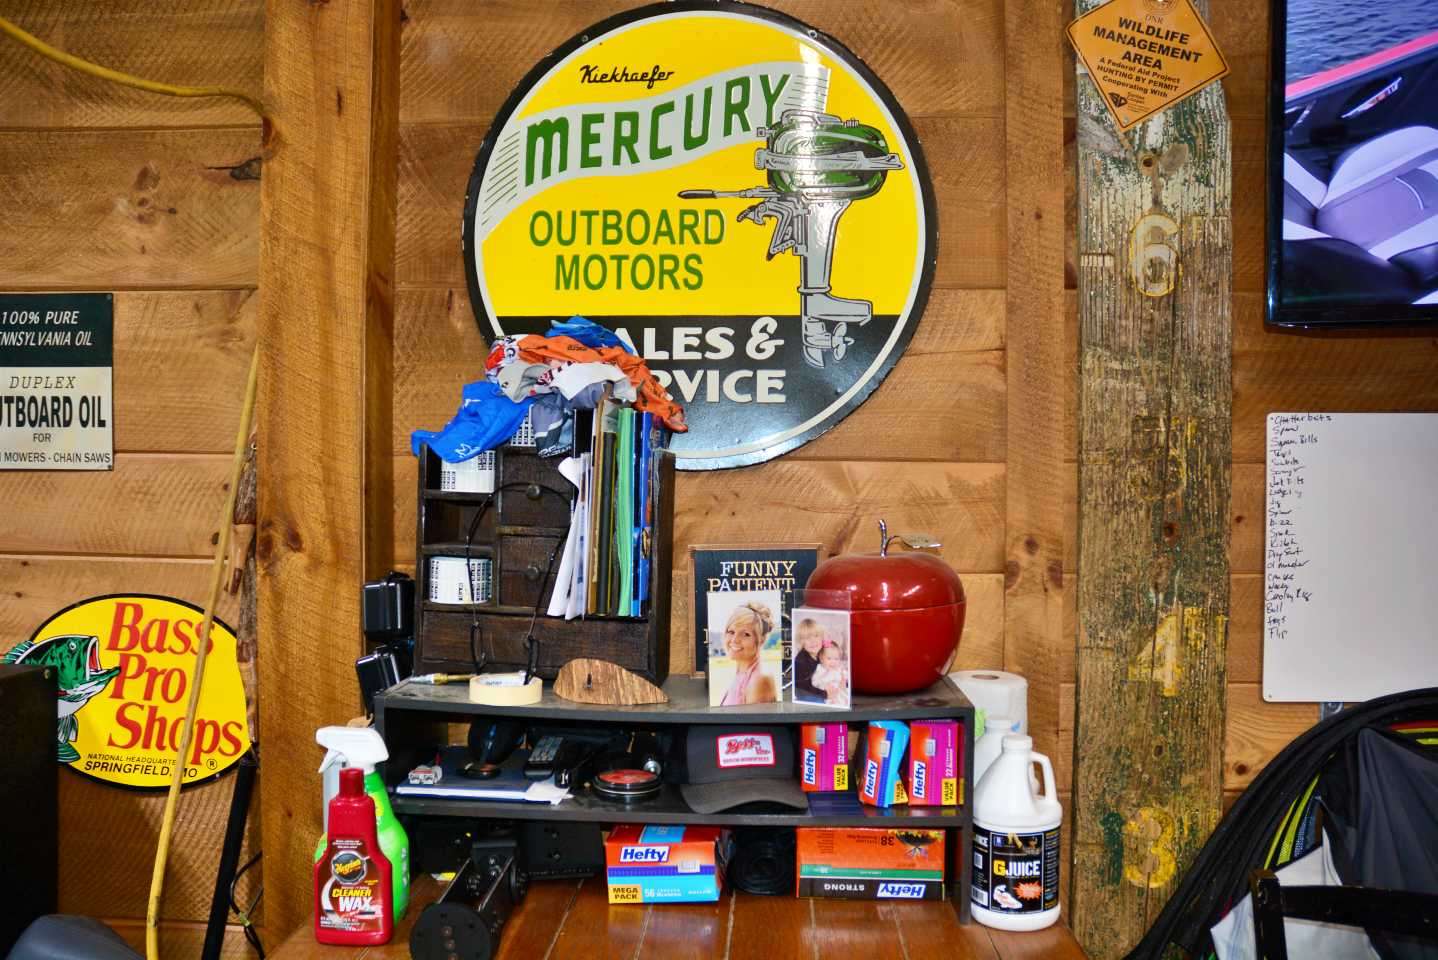 Above the desk are family tokens and items used to keep tackle and gear organized and ready for the road.